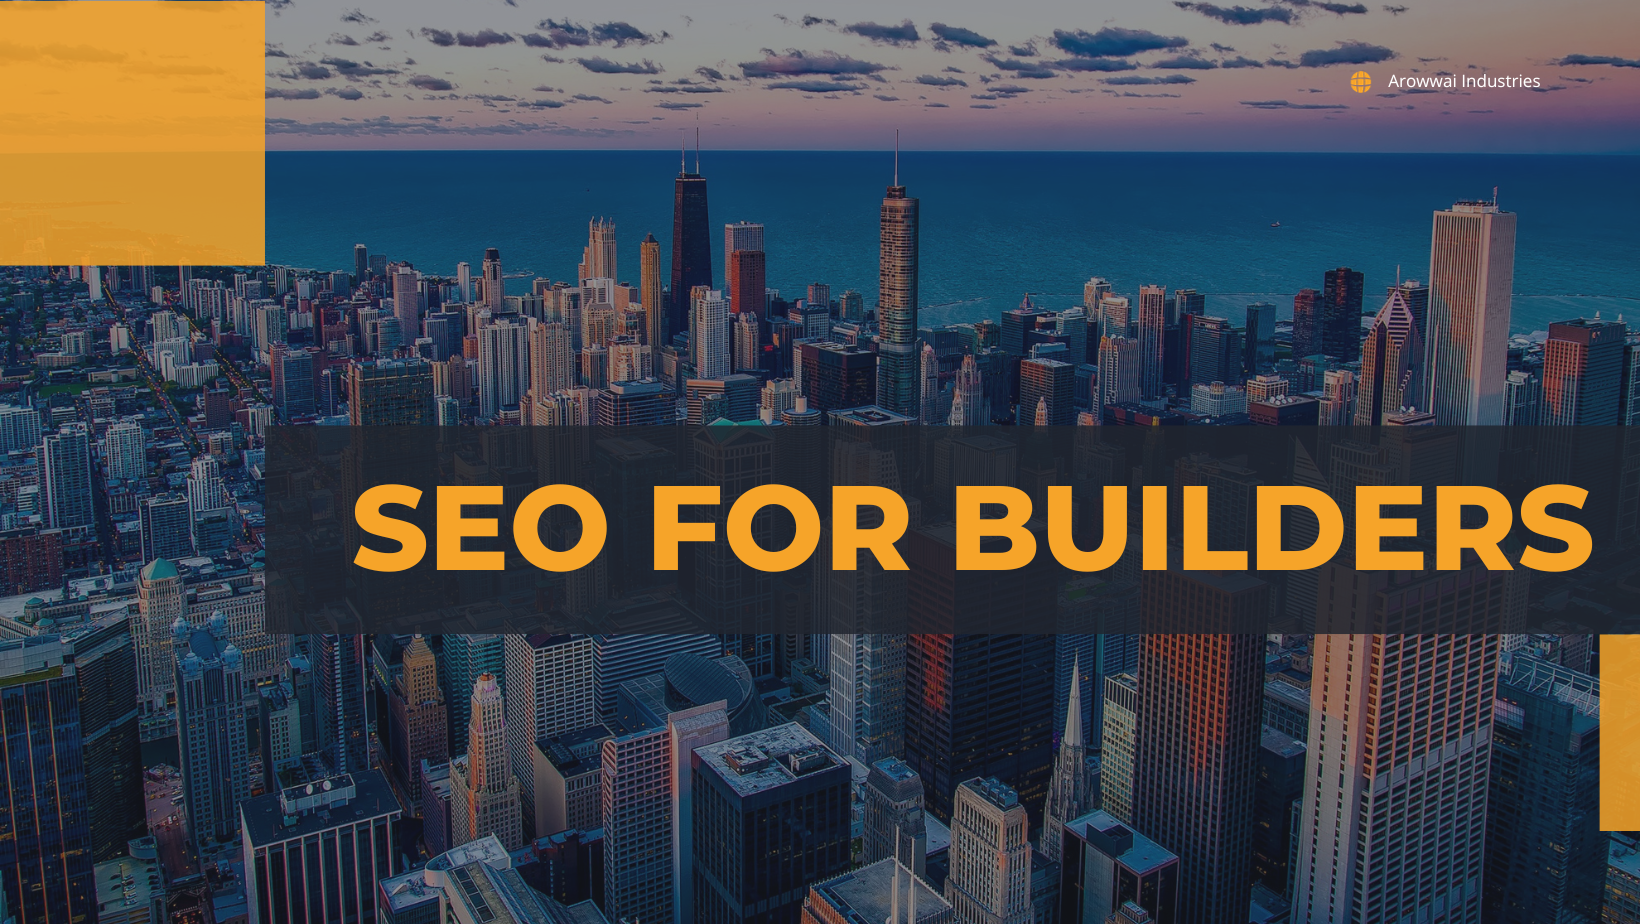 SEO for Builders: Master and Optimizing Your Website to Rank #1 and Attract More Clients